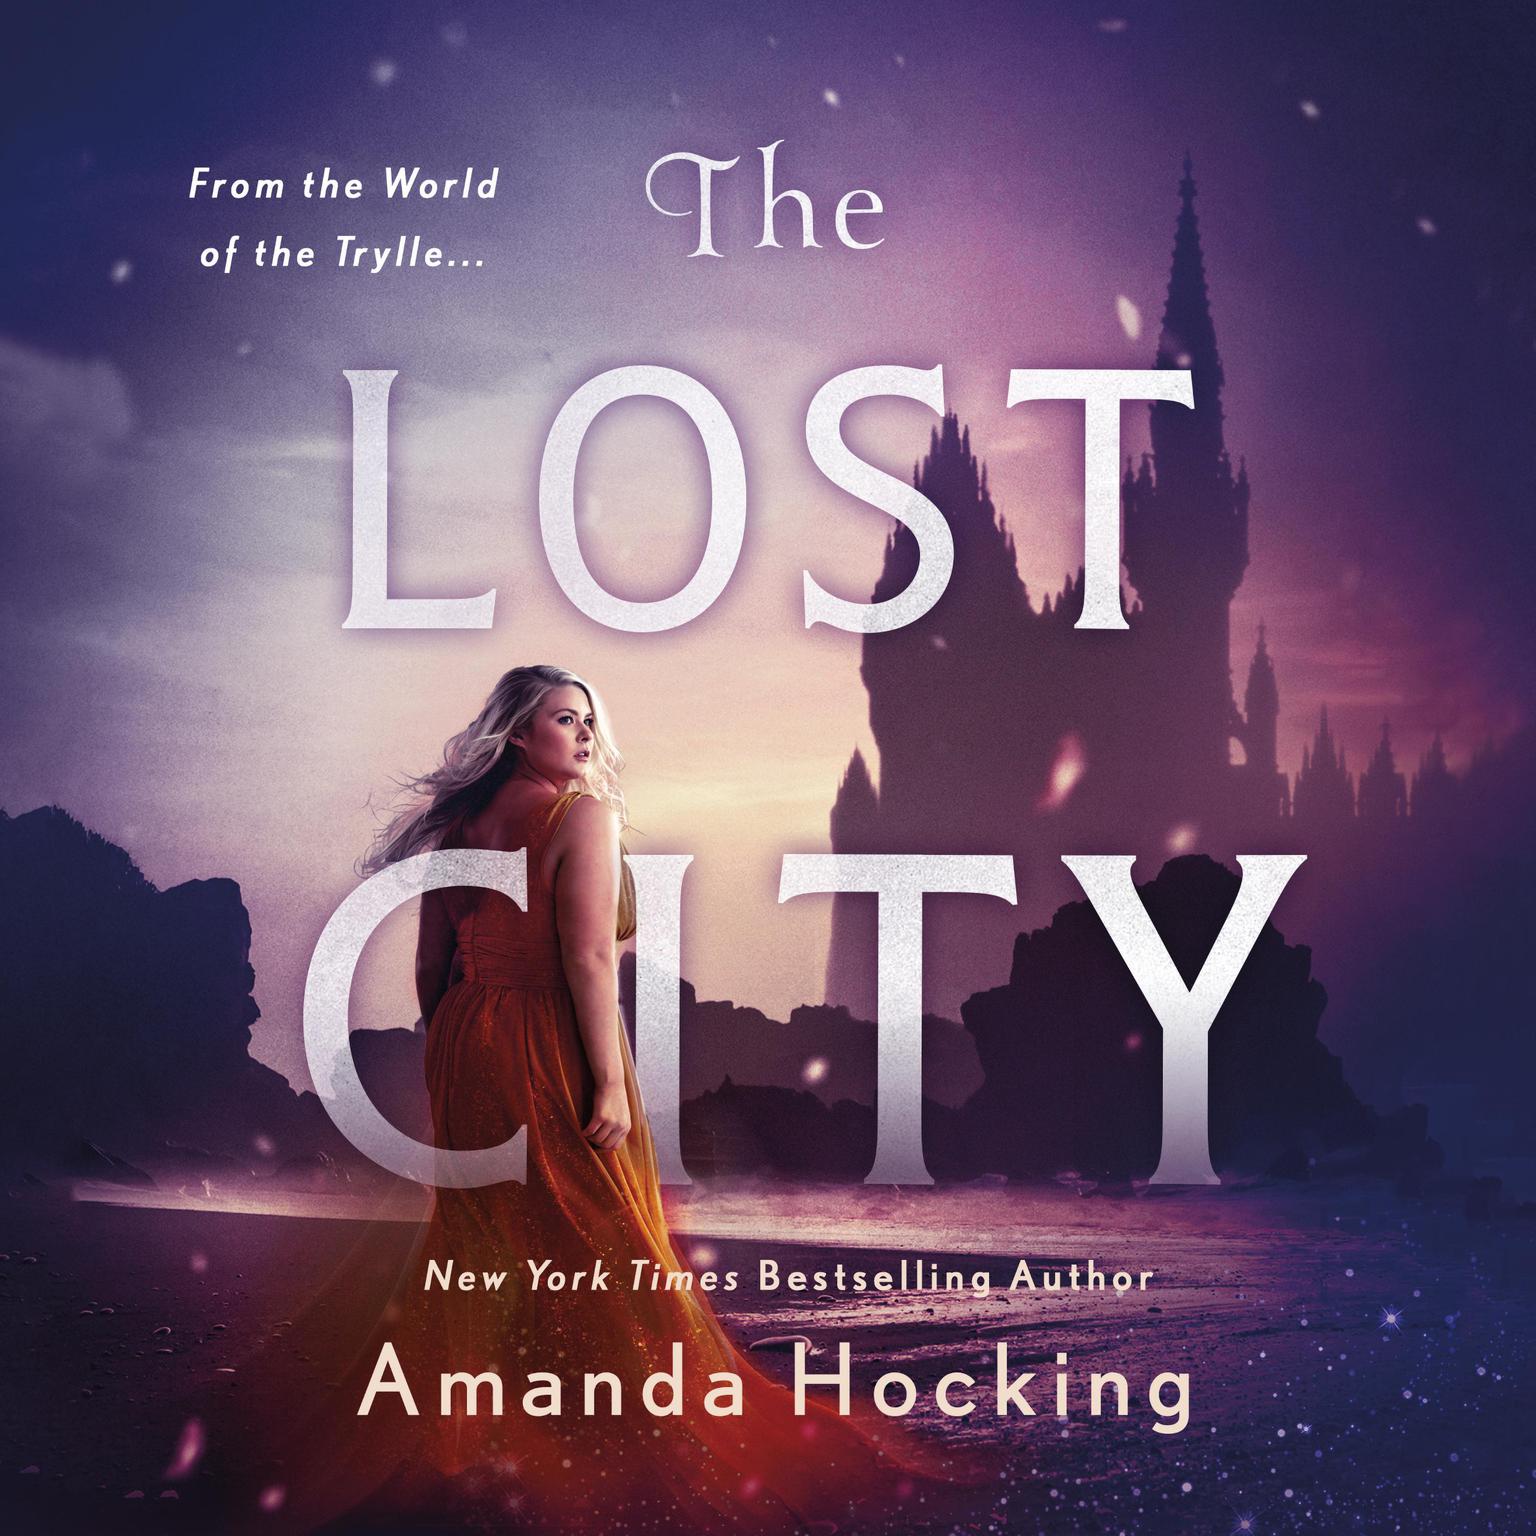 The Lost City: The Omte Origins (from the World of the Trylle) Audiobook, by Amanda Hocking